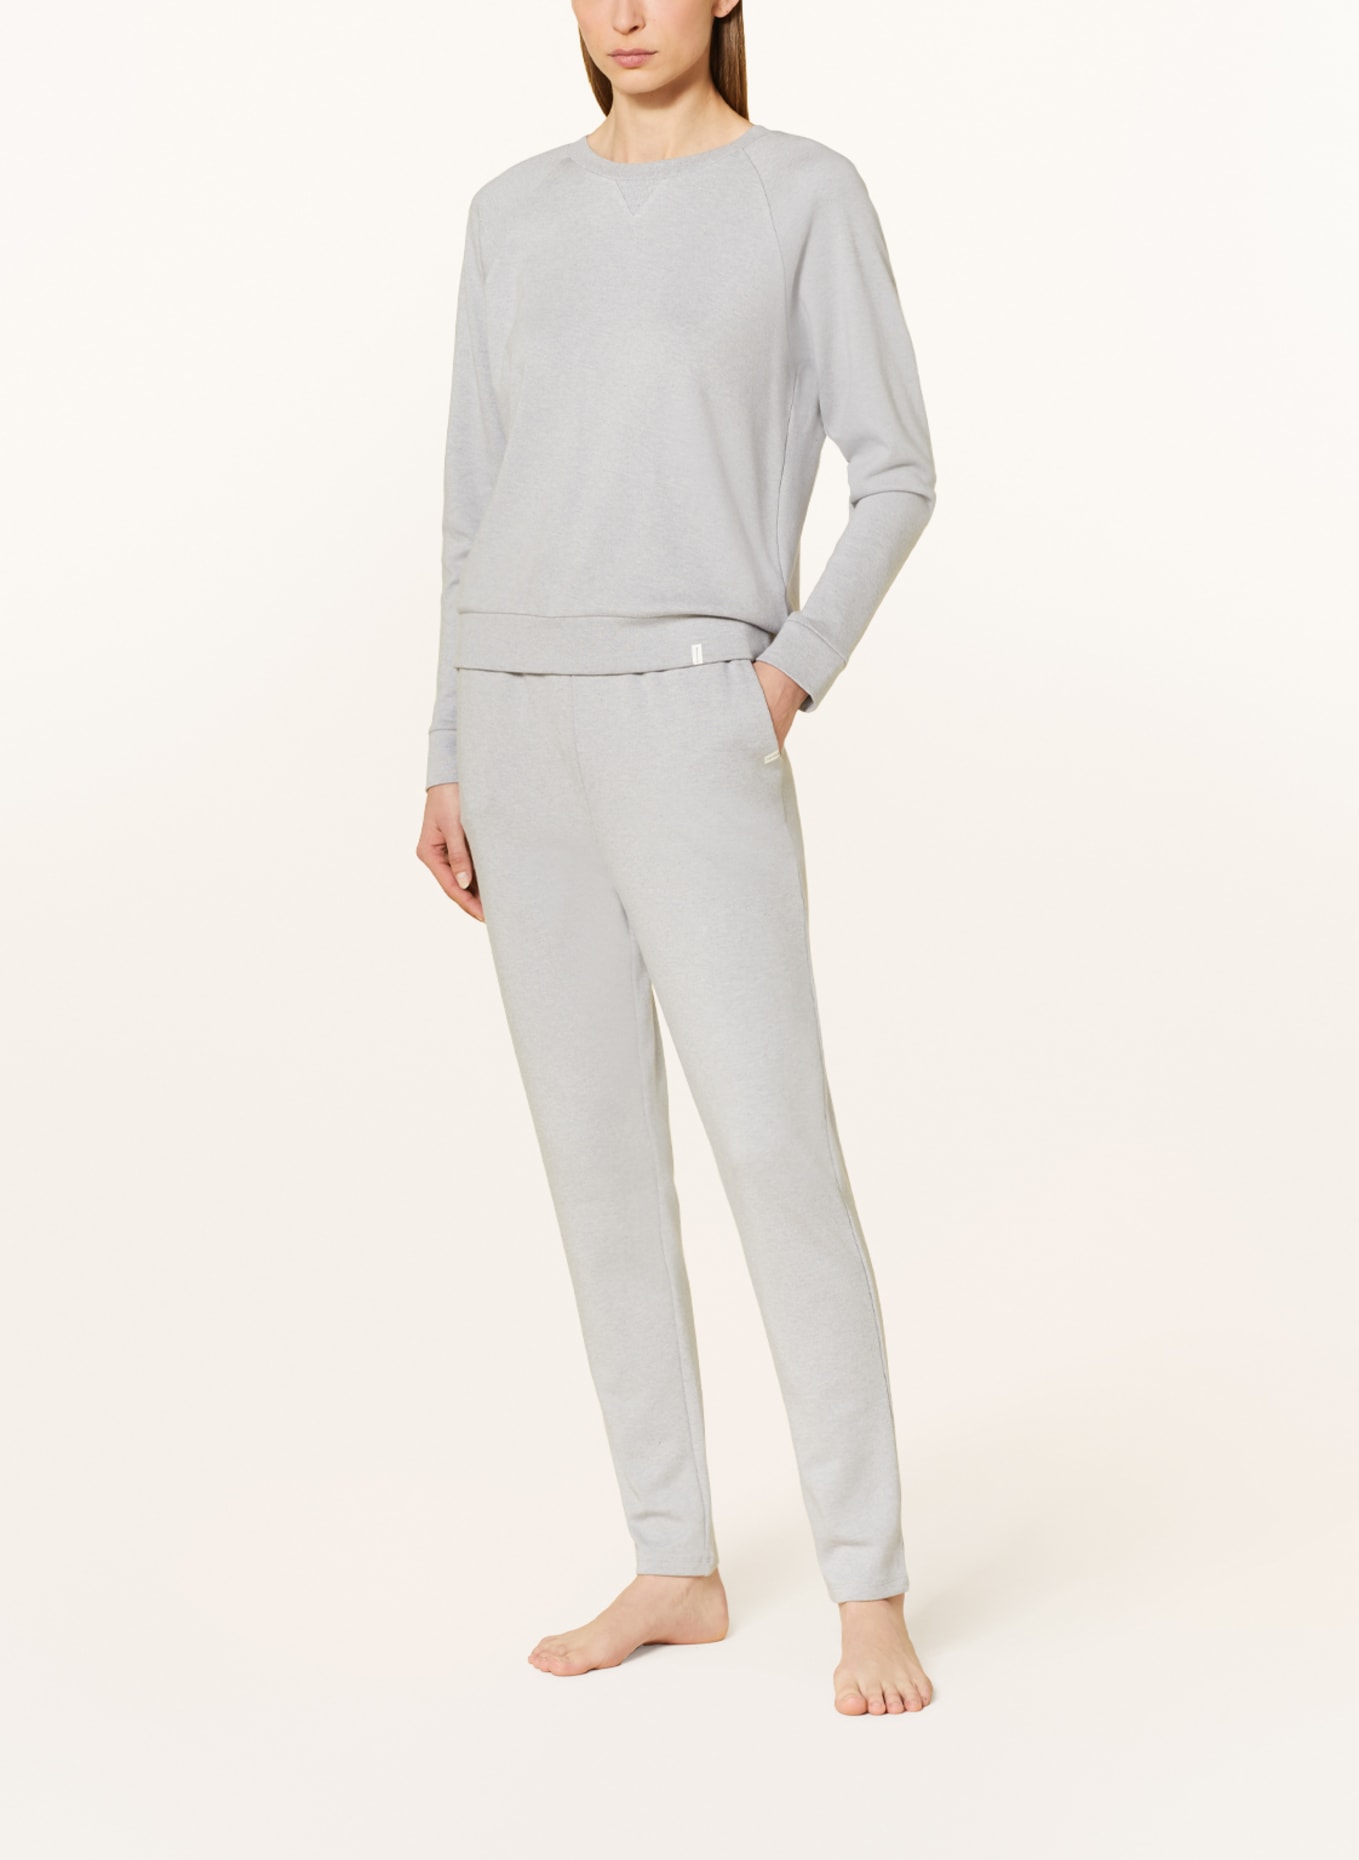 SCHIESSER Lounge pants MIX+RELAX, Color: LIGHT GRAY (Image 2)